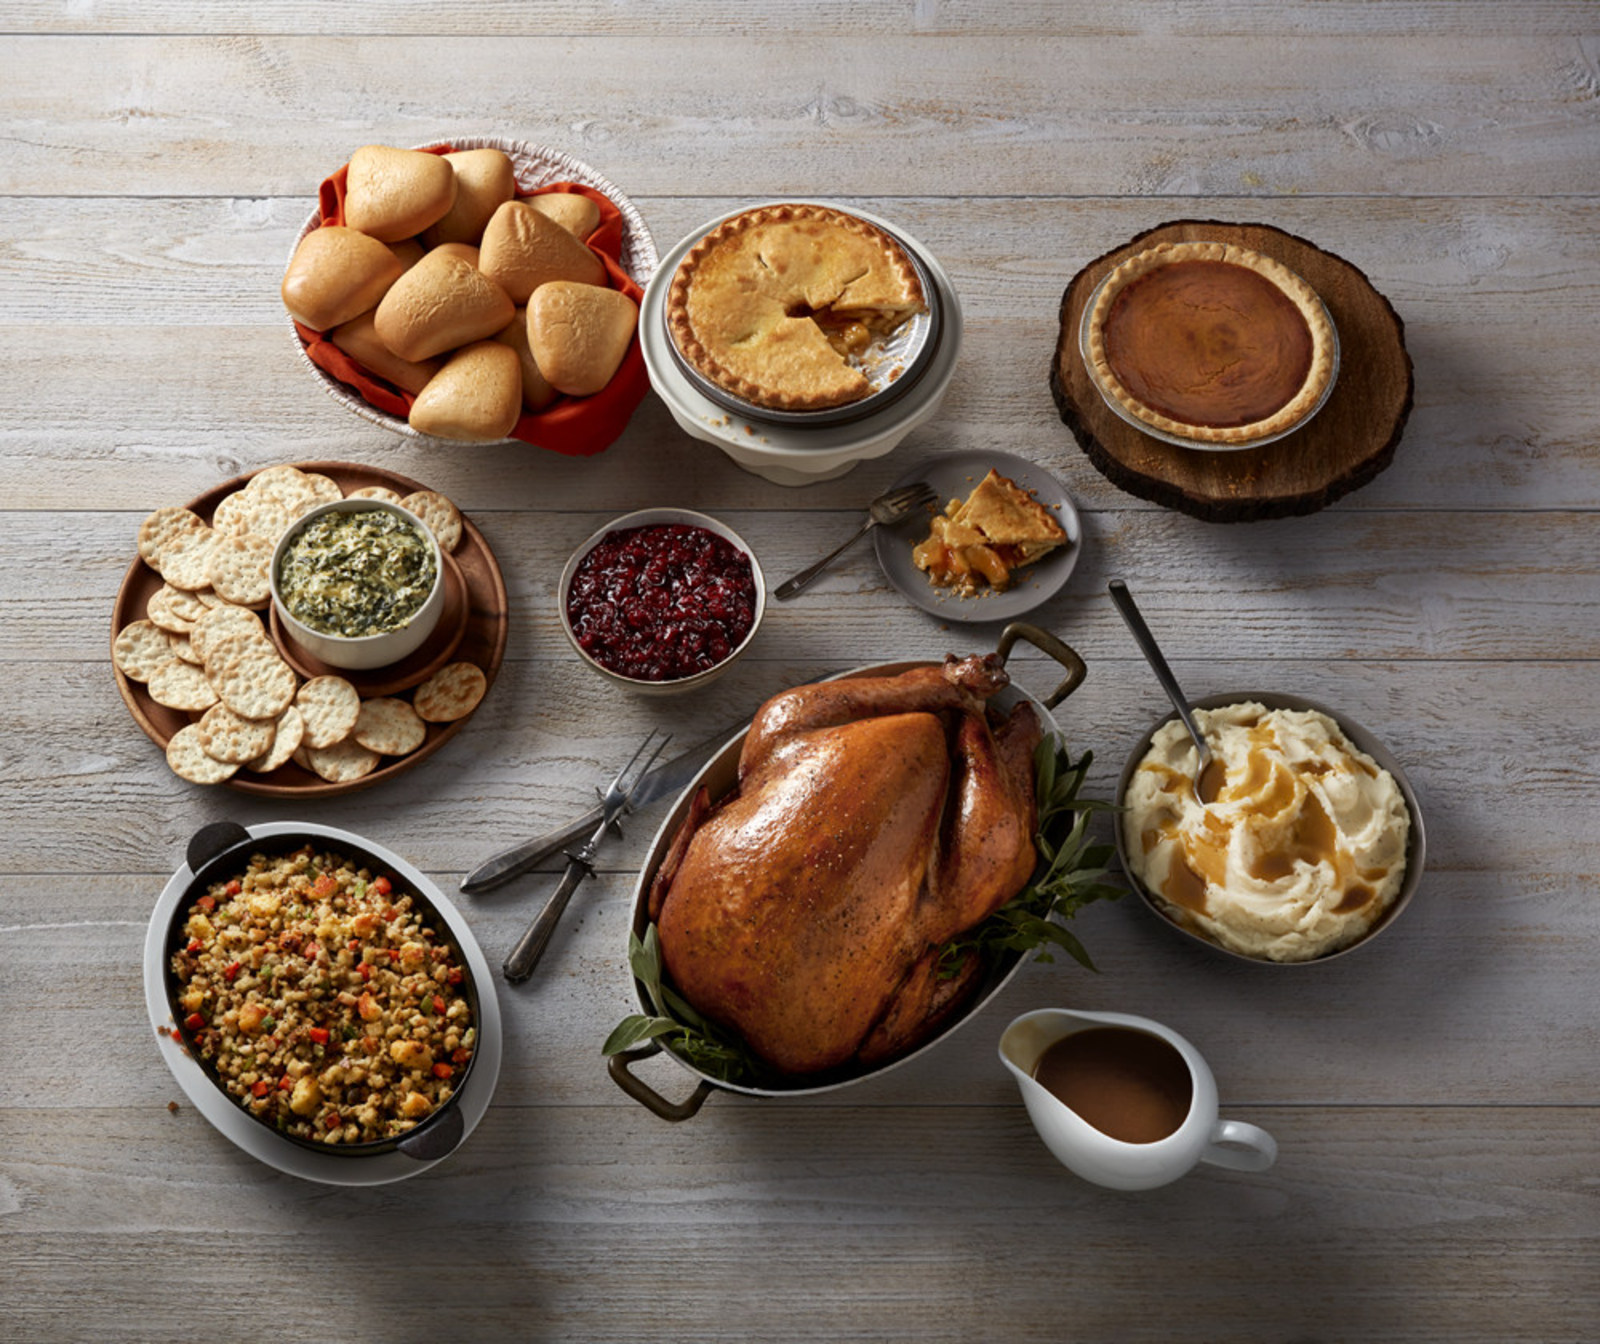 Boston Market Aims To Make This Thanksgiving The Easiest And Most